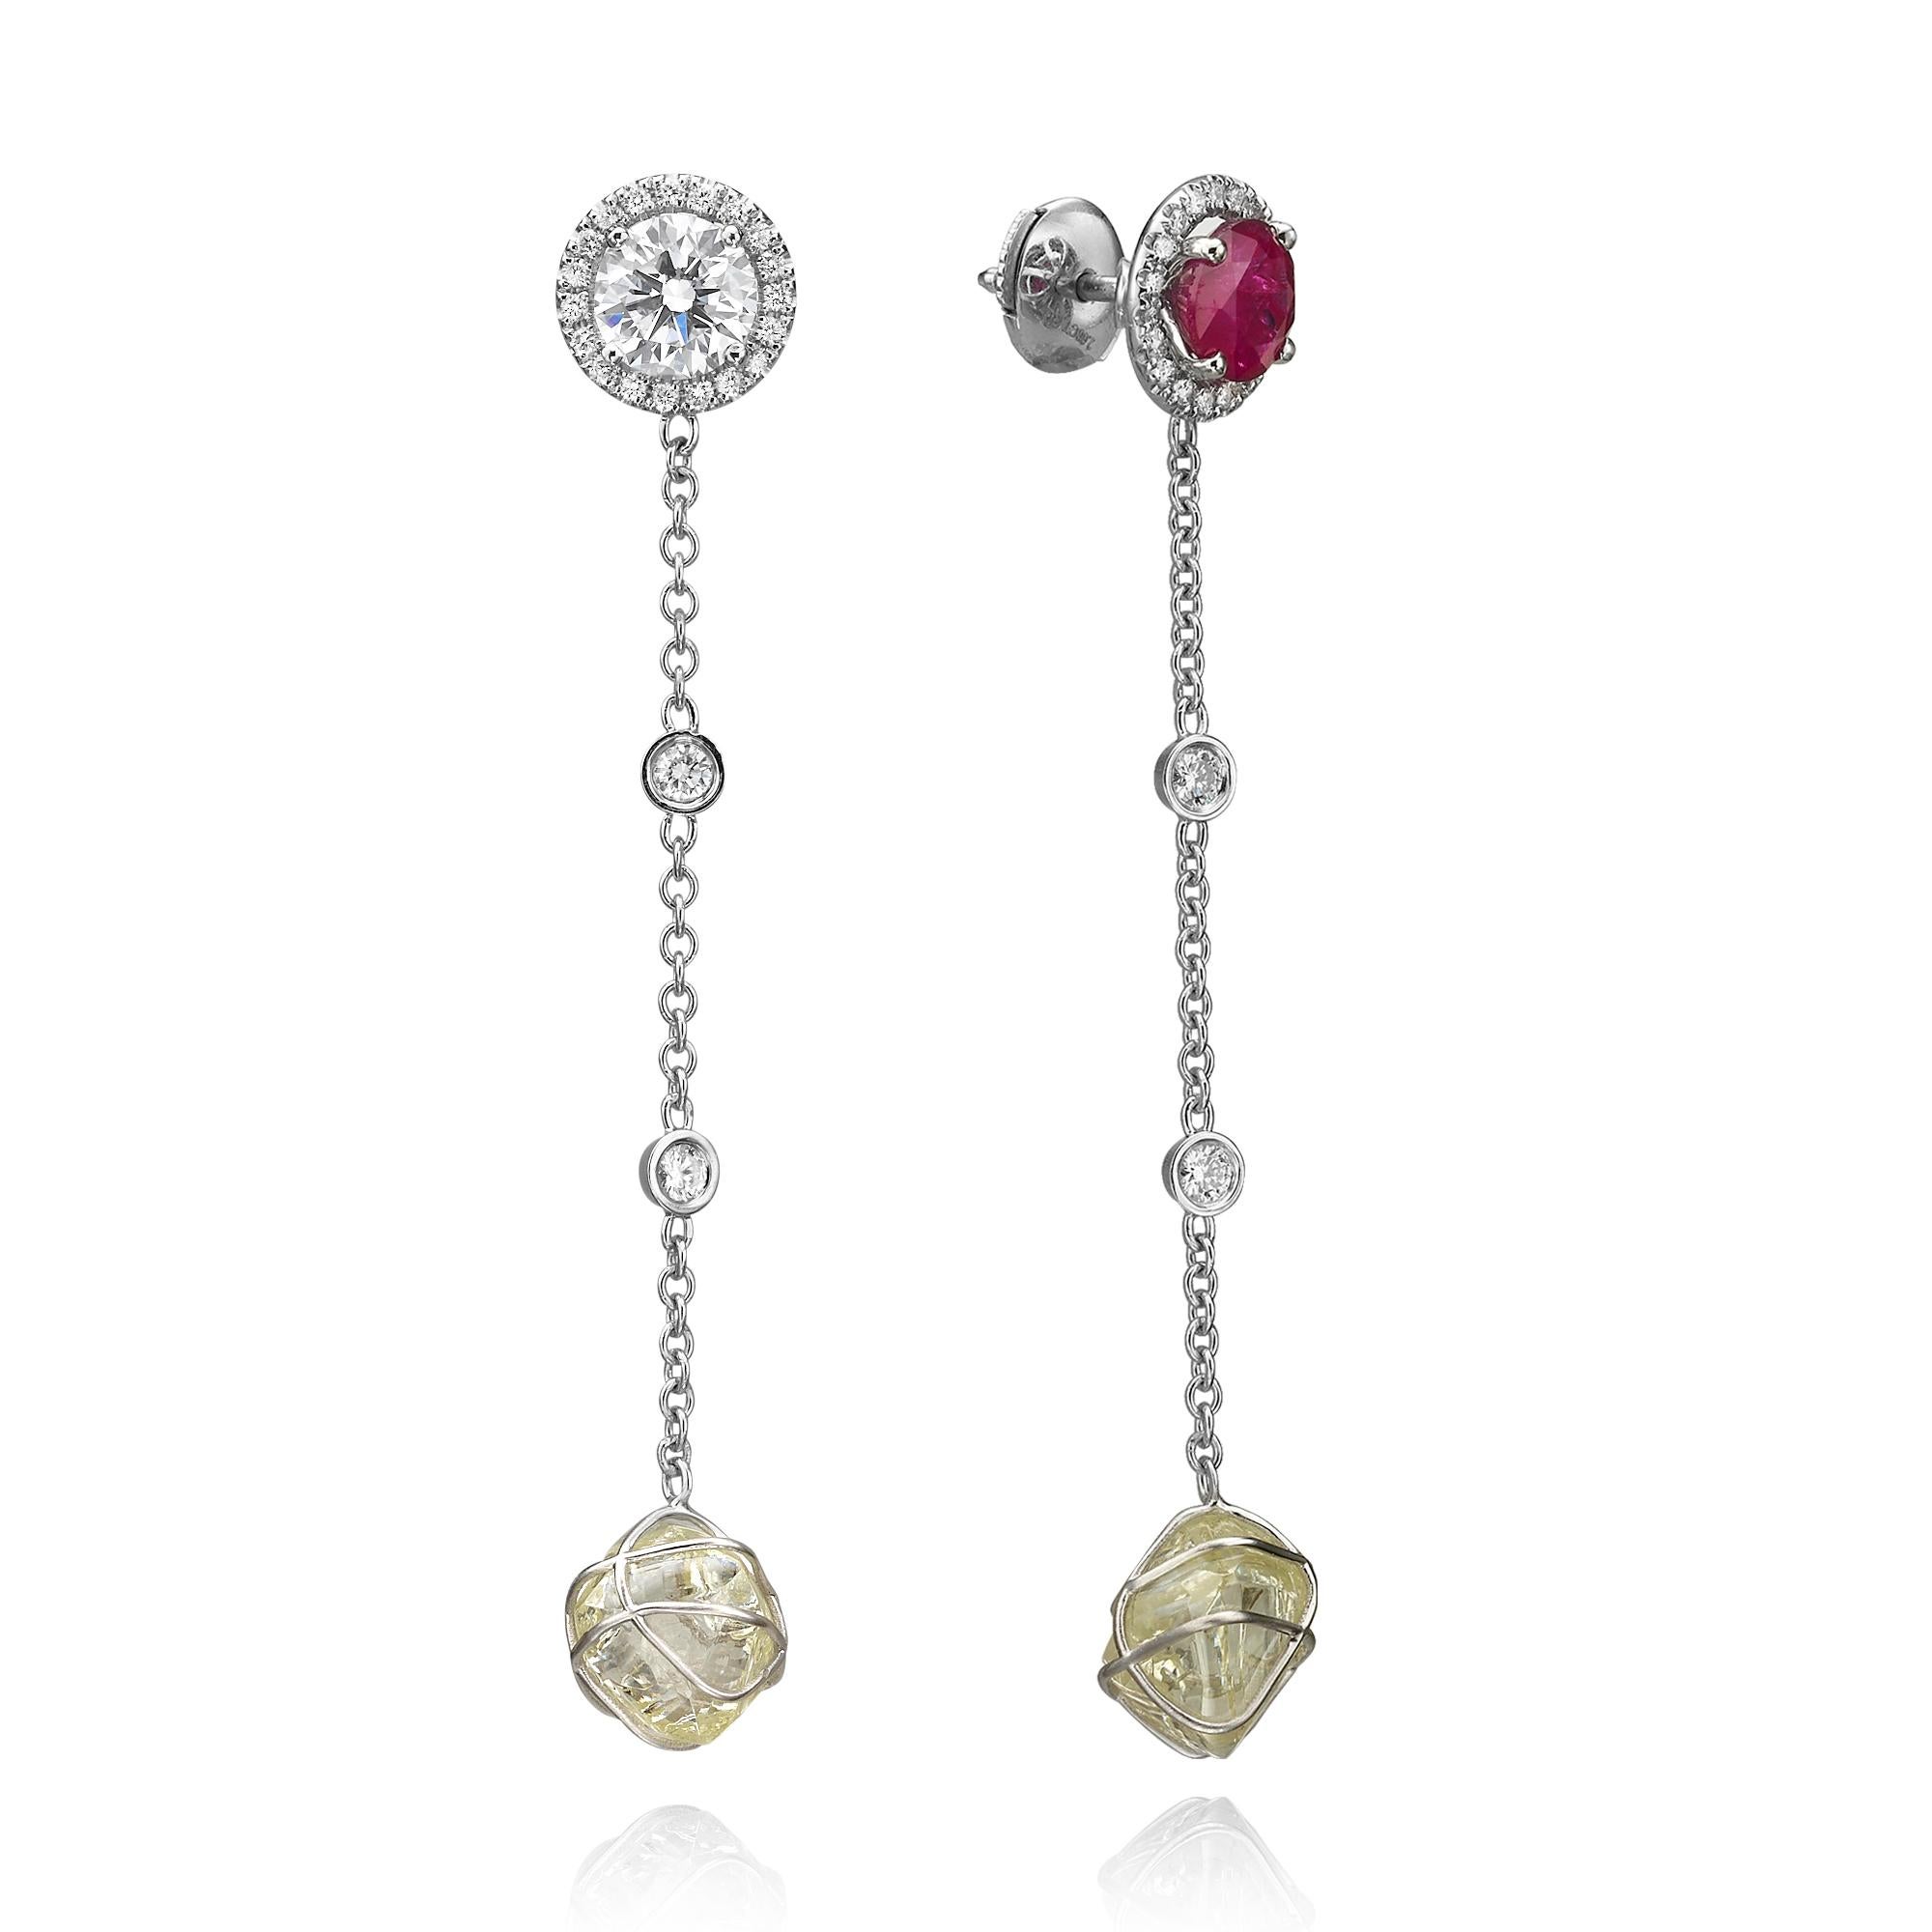 Round Cut GIA Certified 11.15 Carat Interchangeable Diamond and Ruby Dangling Earring Set For Sale